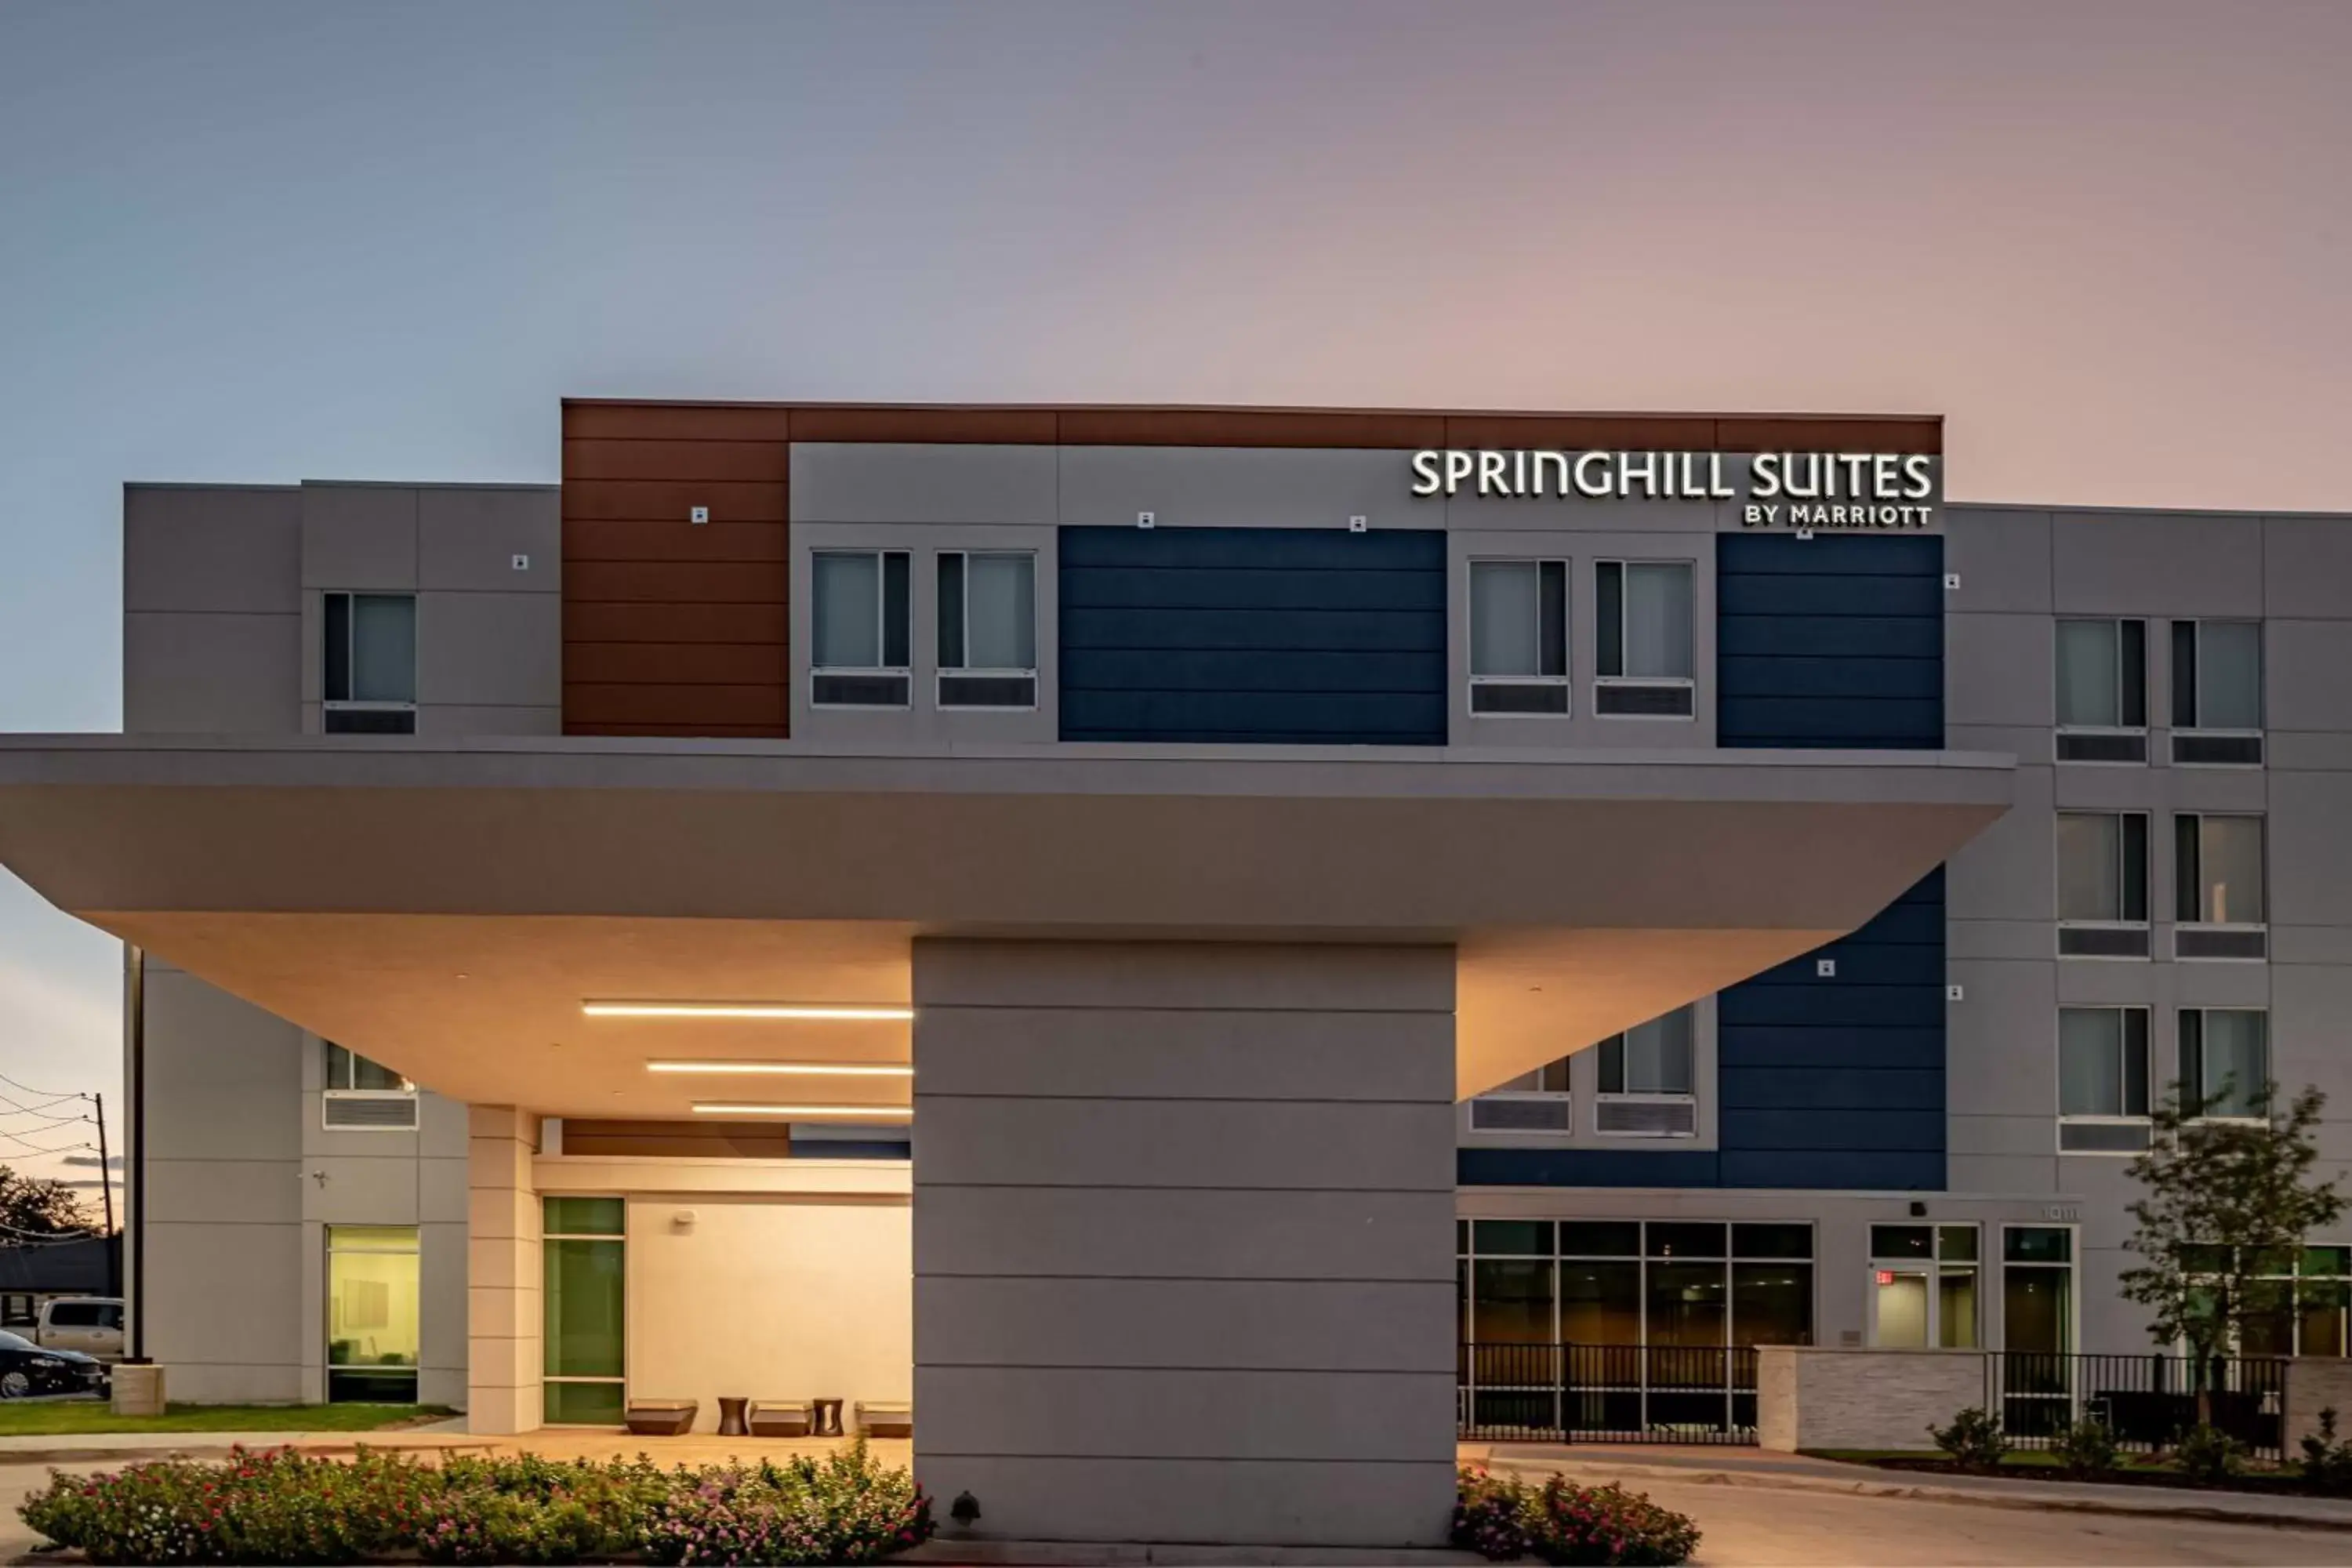 Property Building in SpringHill Suites Dallas Central Expressway